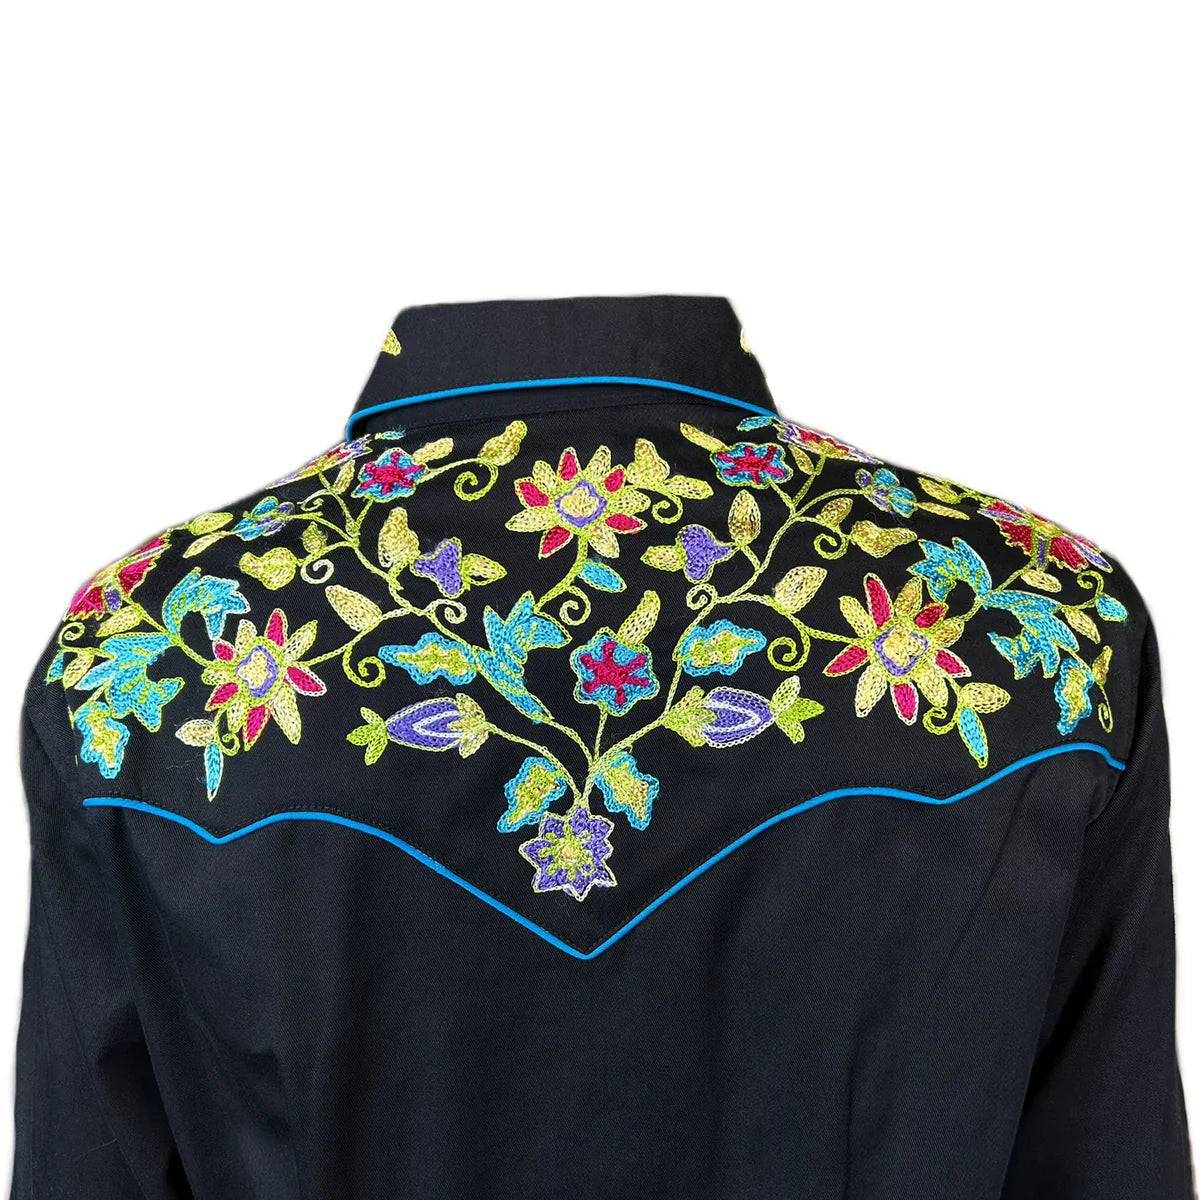 Vintage Inspired Western Shirt Ladies Rockmount Floral Embroidery Black Front